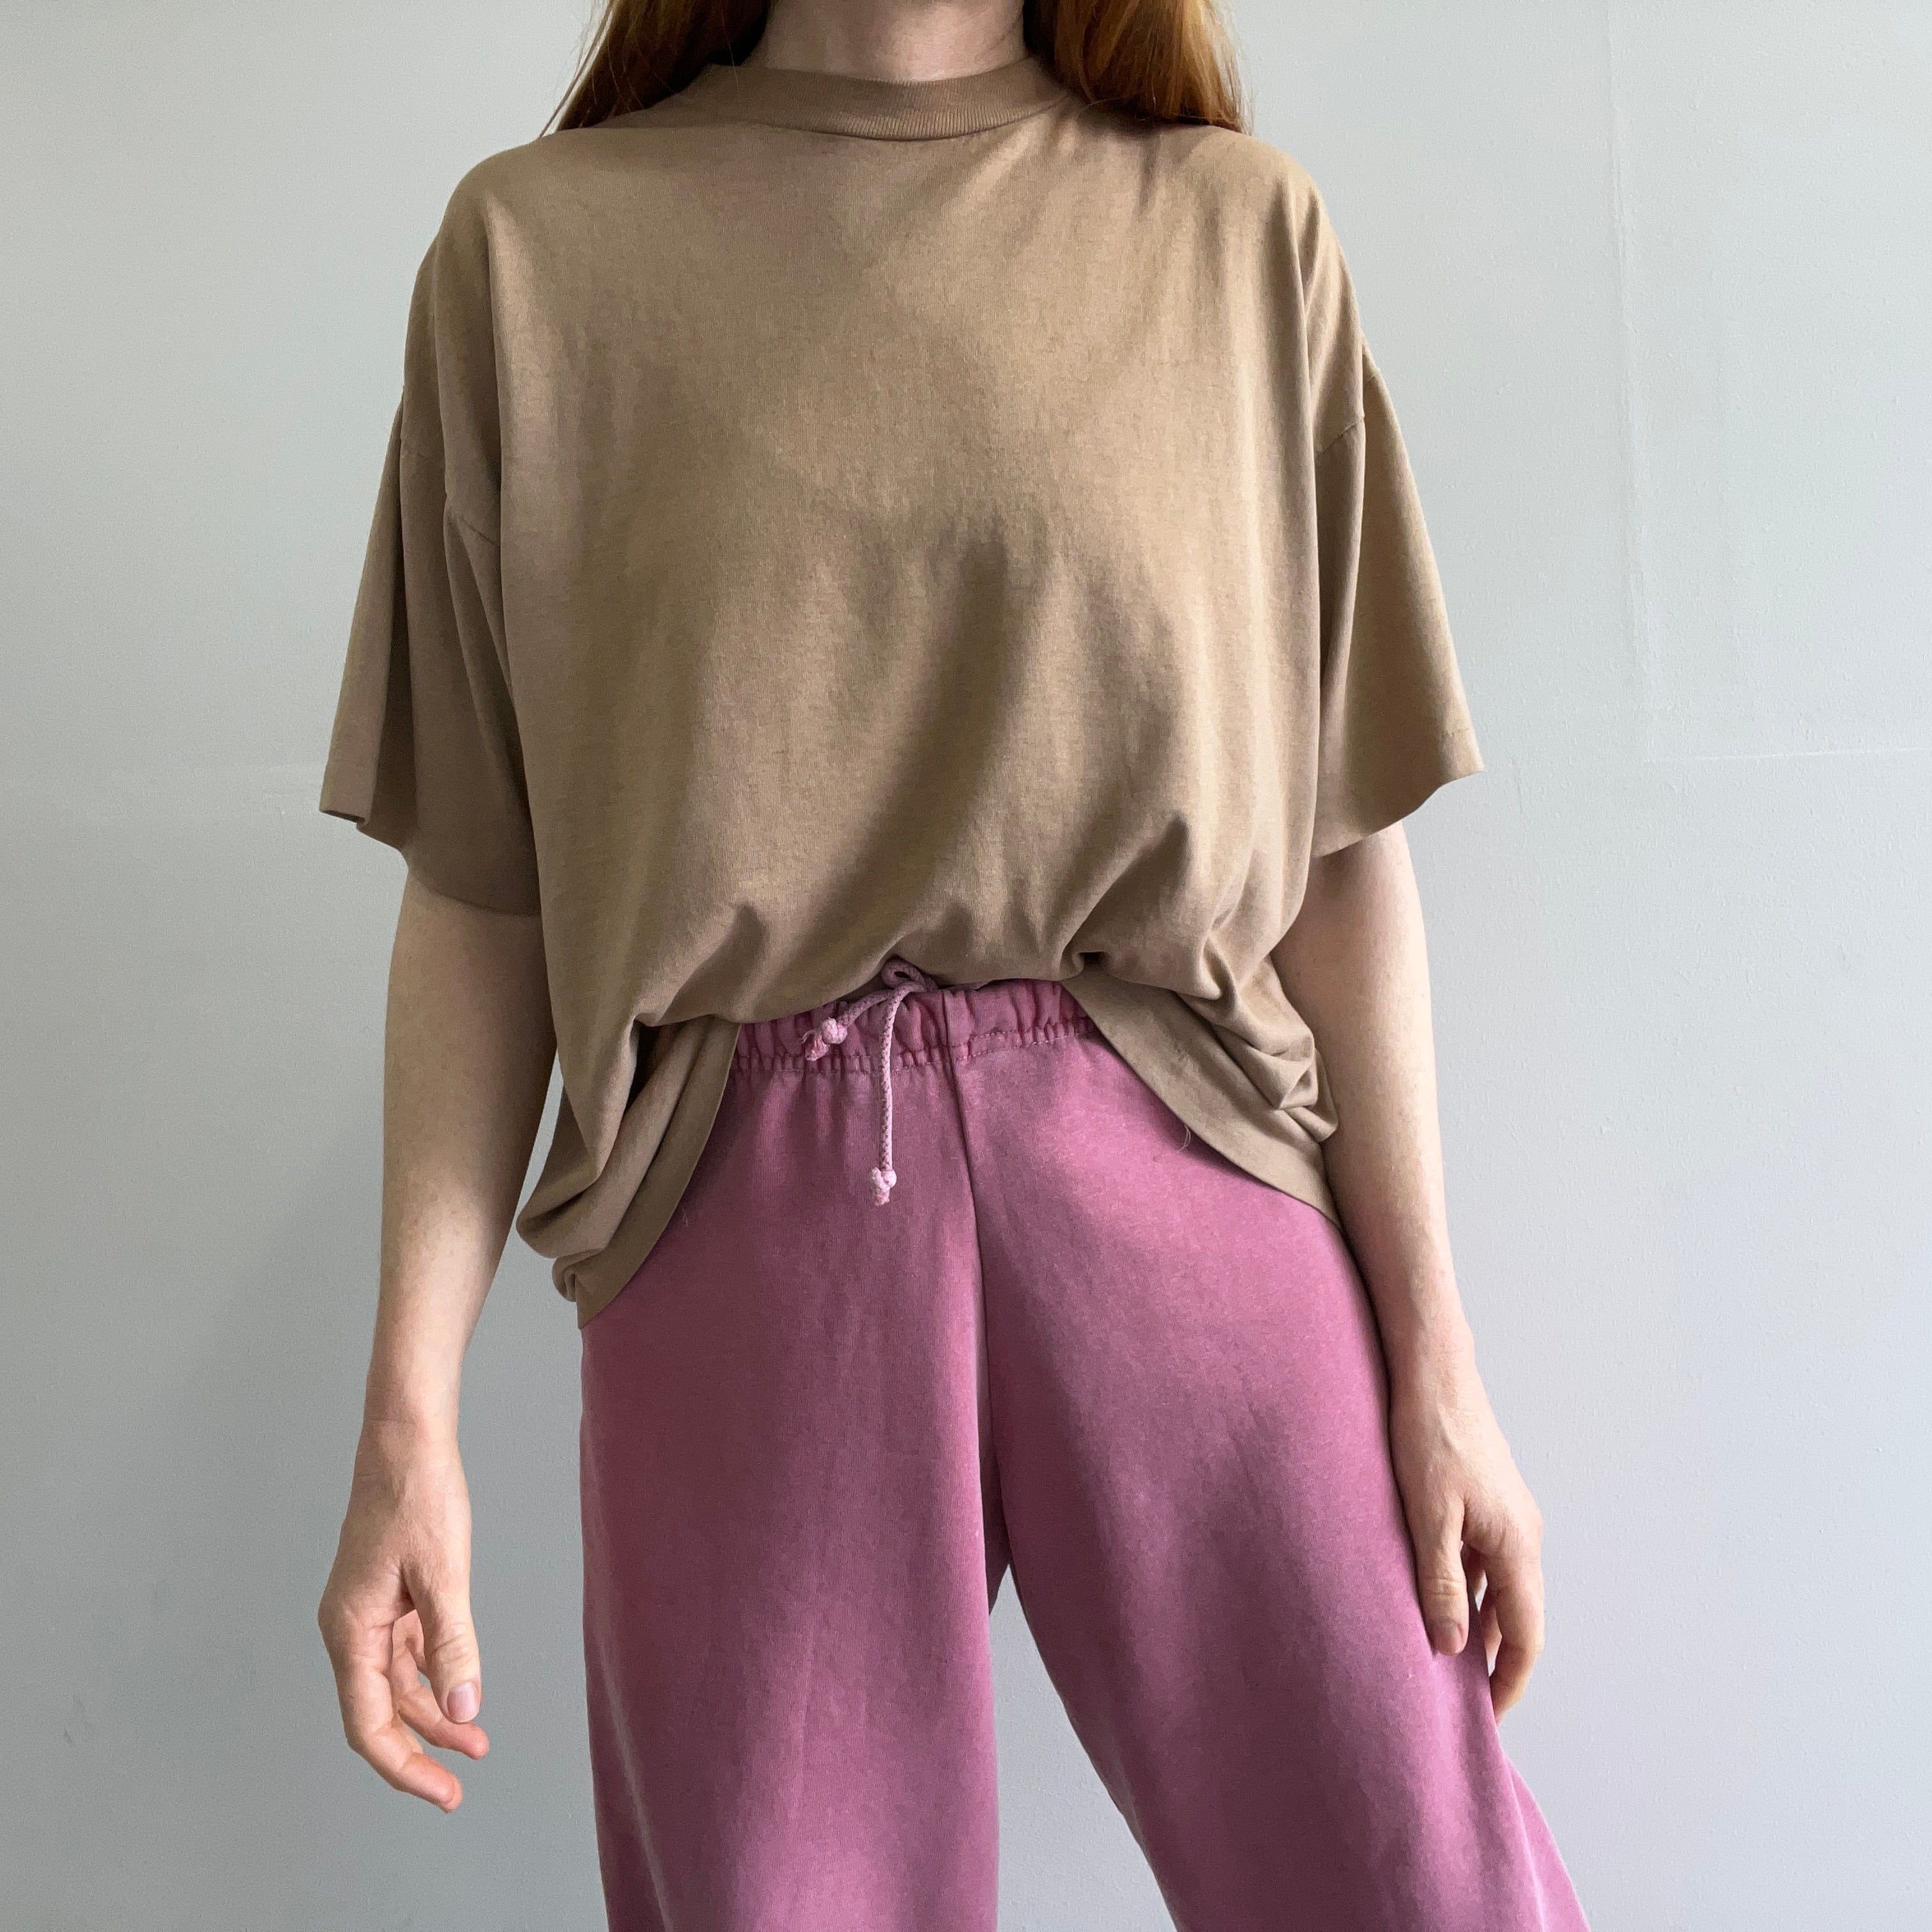 1990s Blank Boxy Slouchy Coffee Colored T-Shirt